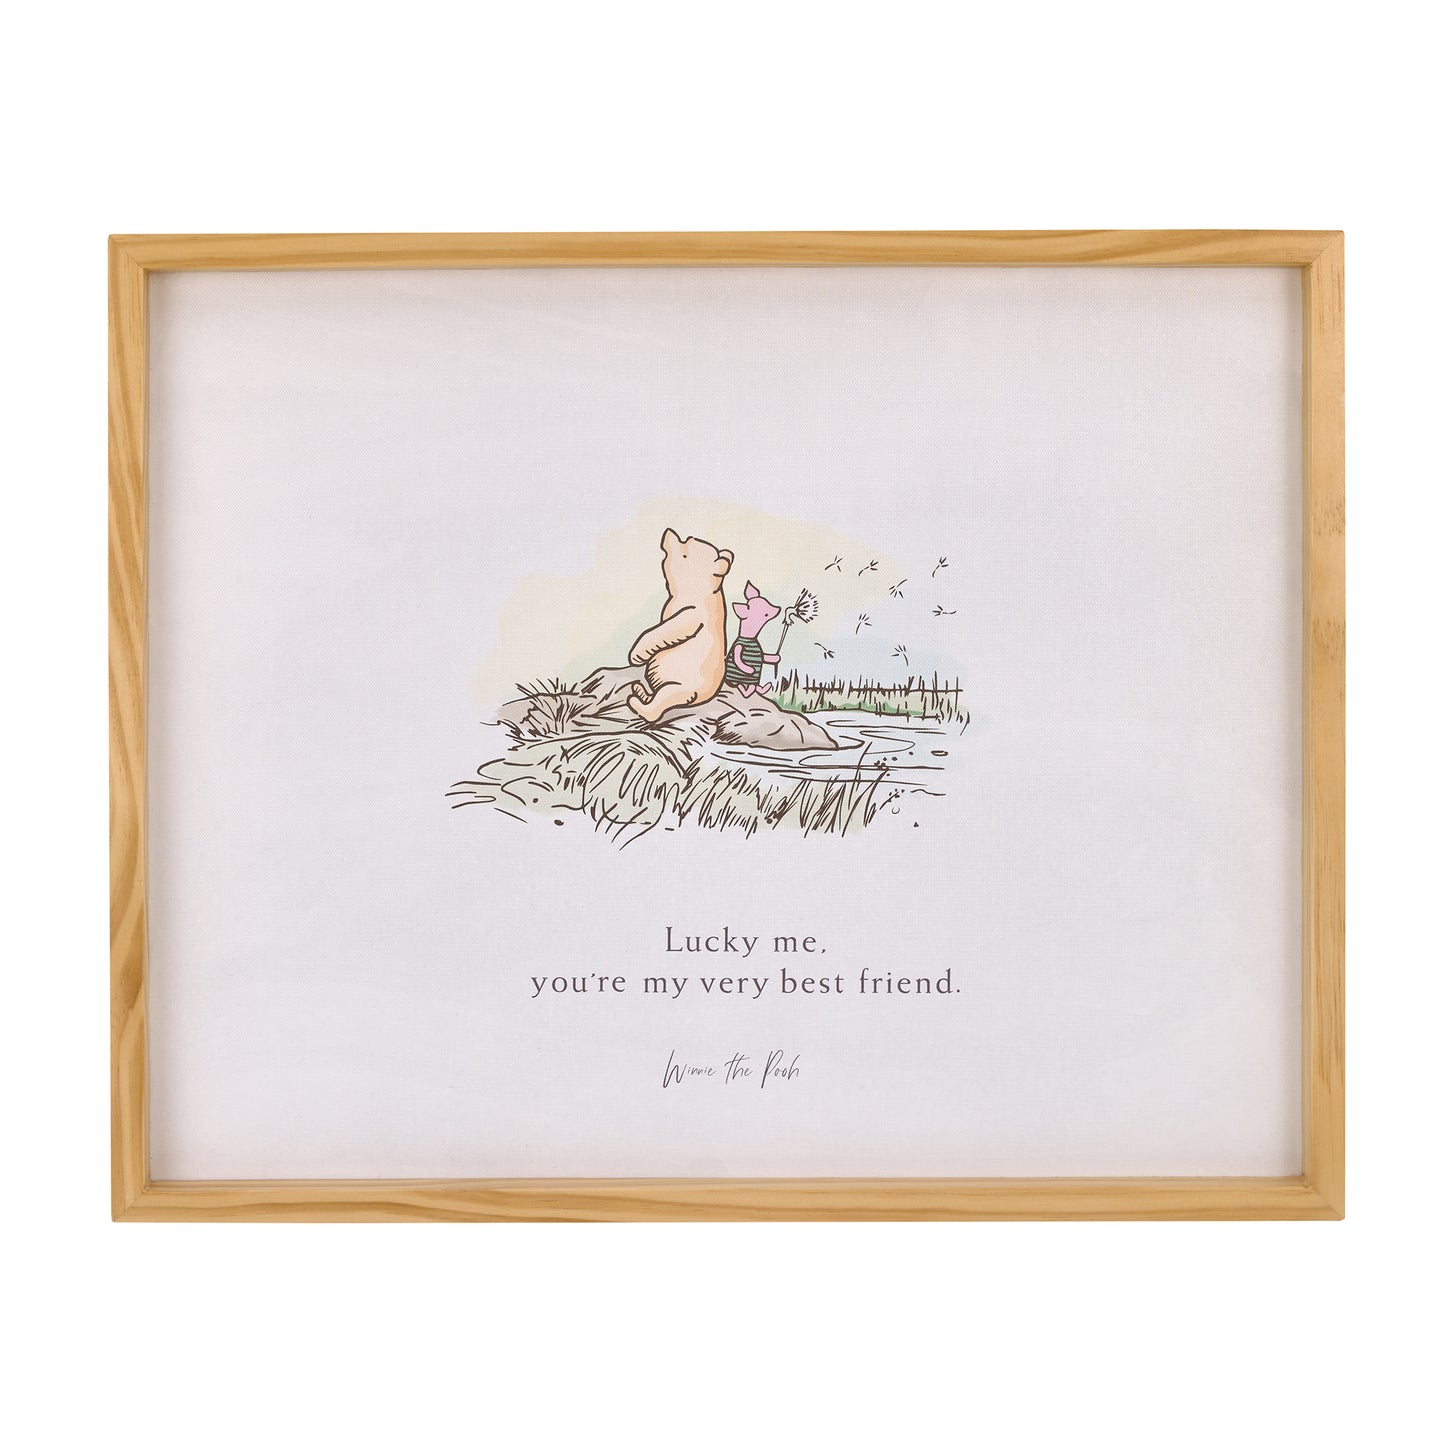 Disney Winnie the Pooh - Classic Pooh "Lucky Me, You're My Very Best Friend" with Piglet Natural Pine Wood Framed Art Canvas Wall Décor